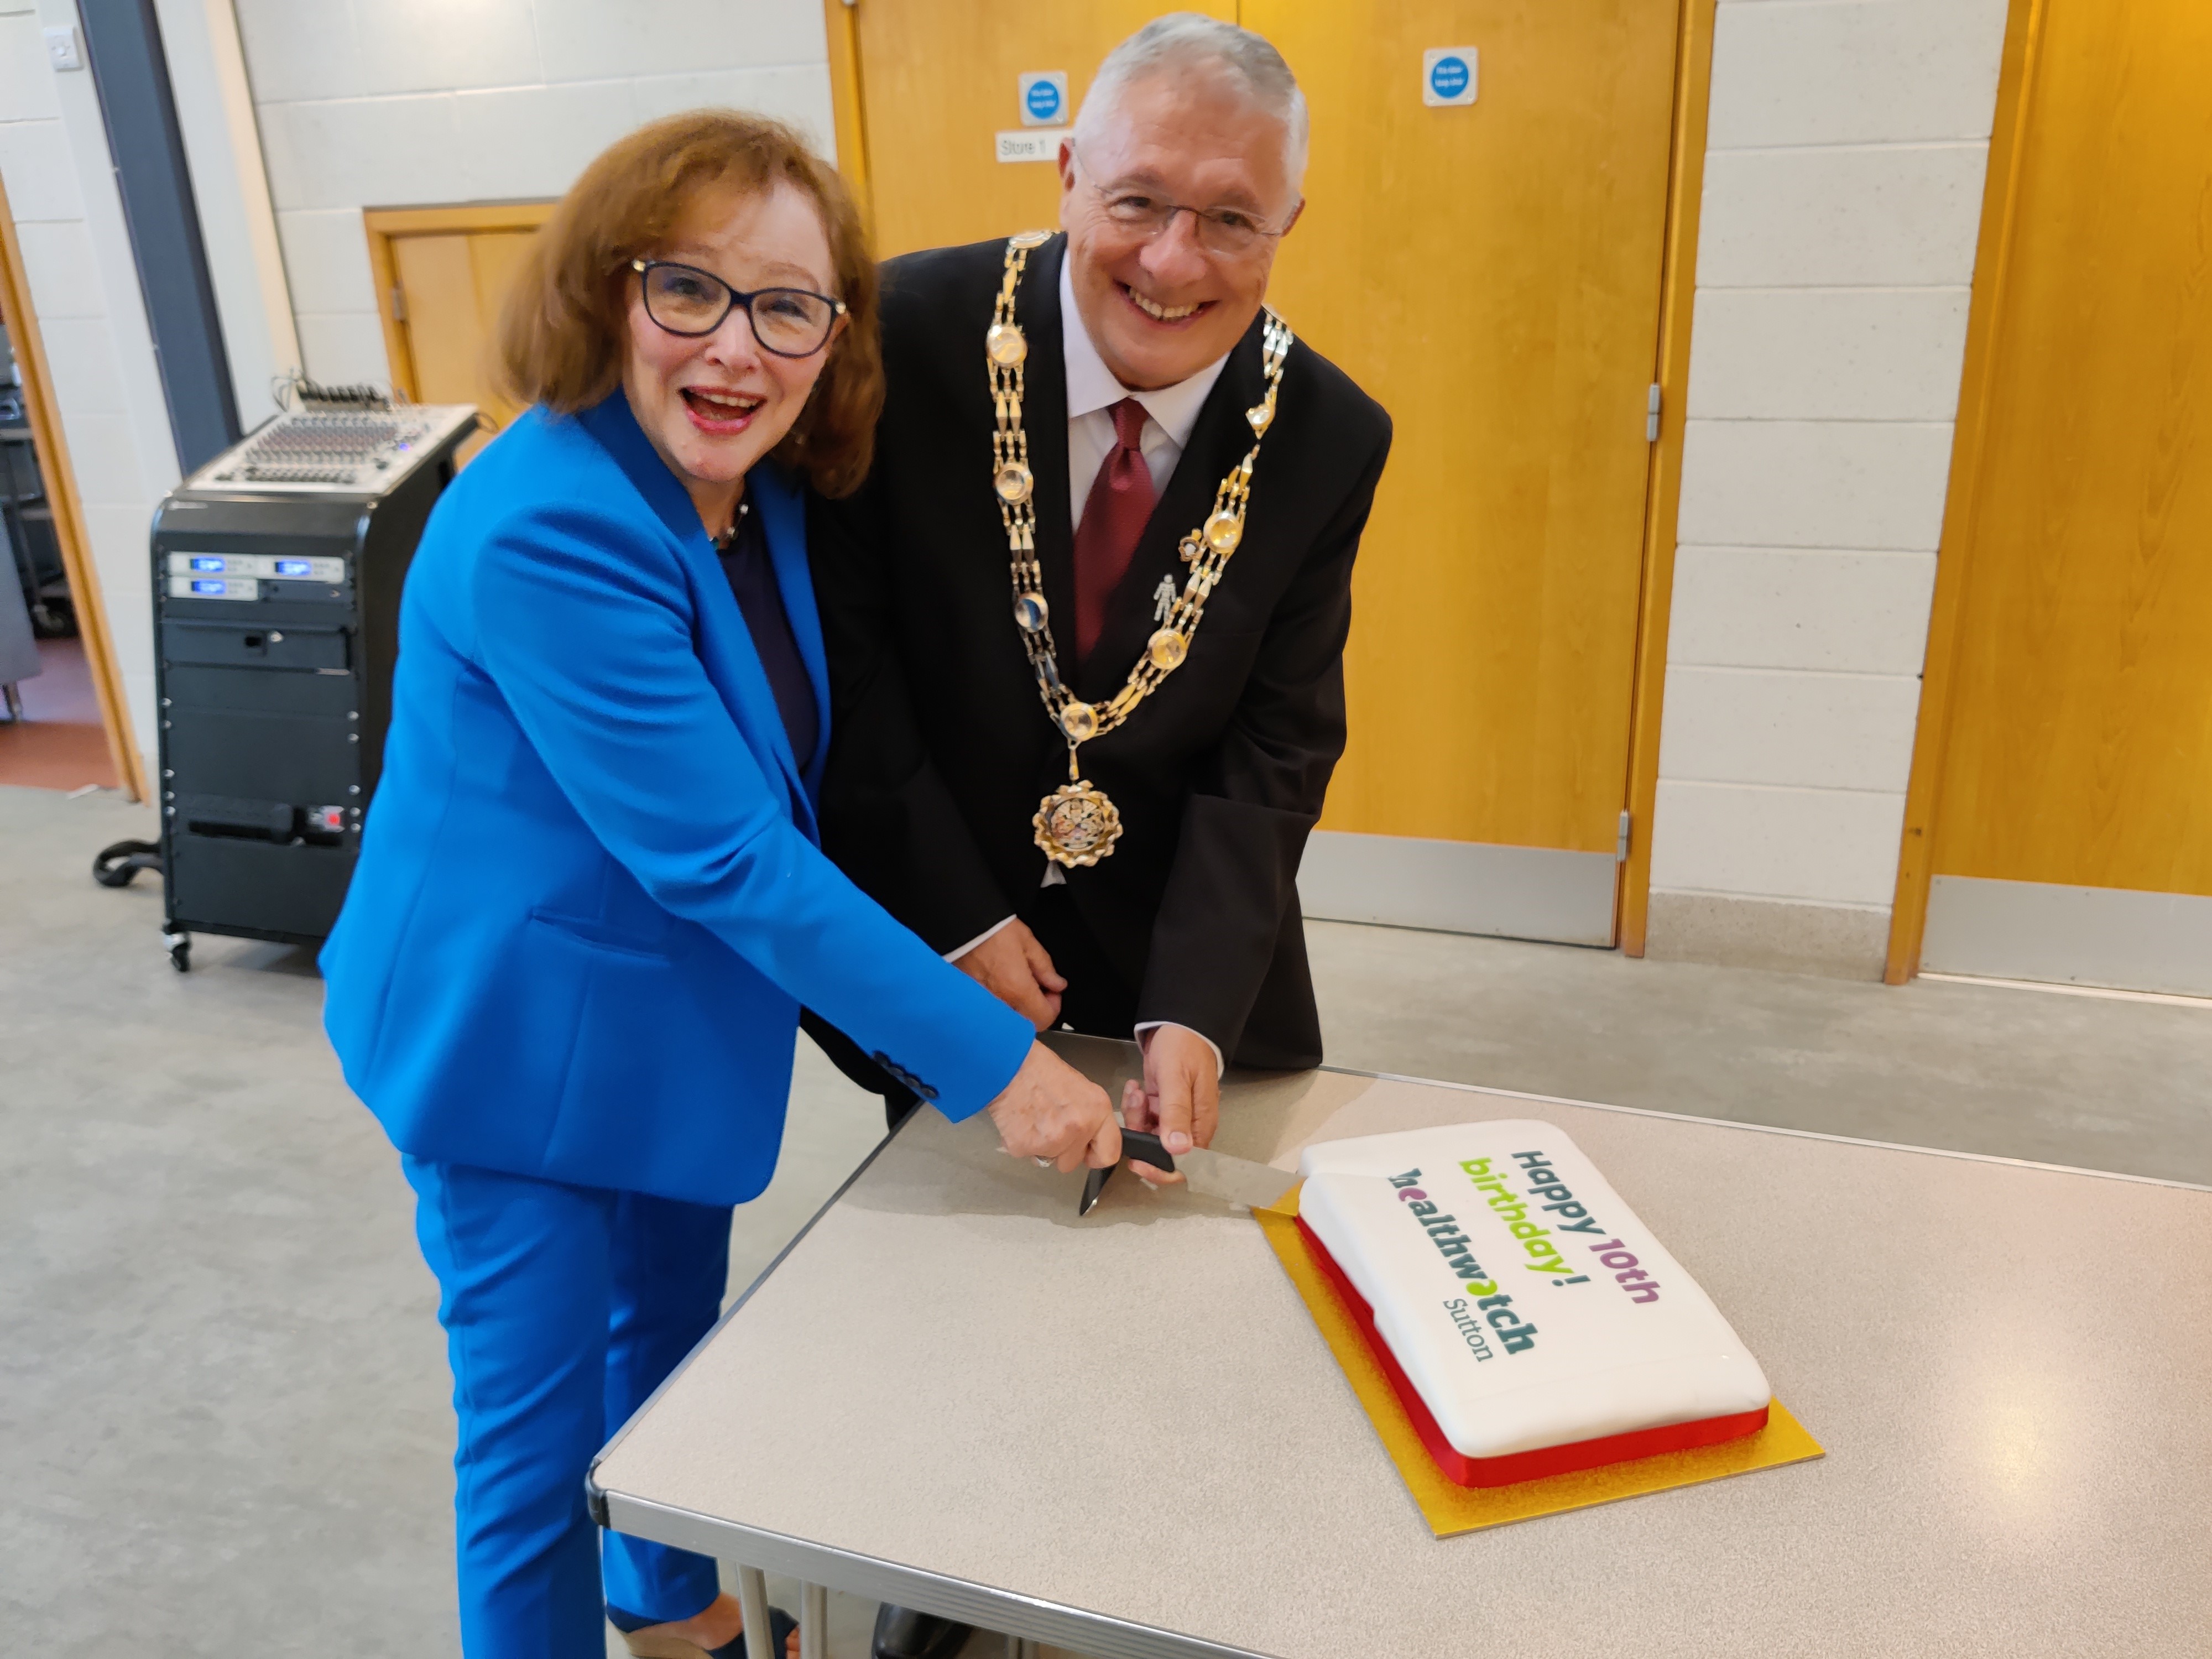 Our chair, Barbara McIntosh, and the Mayor of Sutton cut the cake